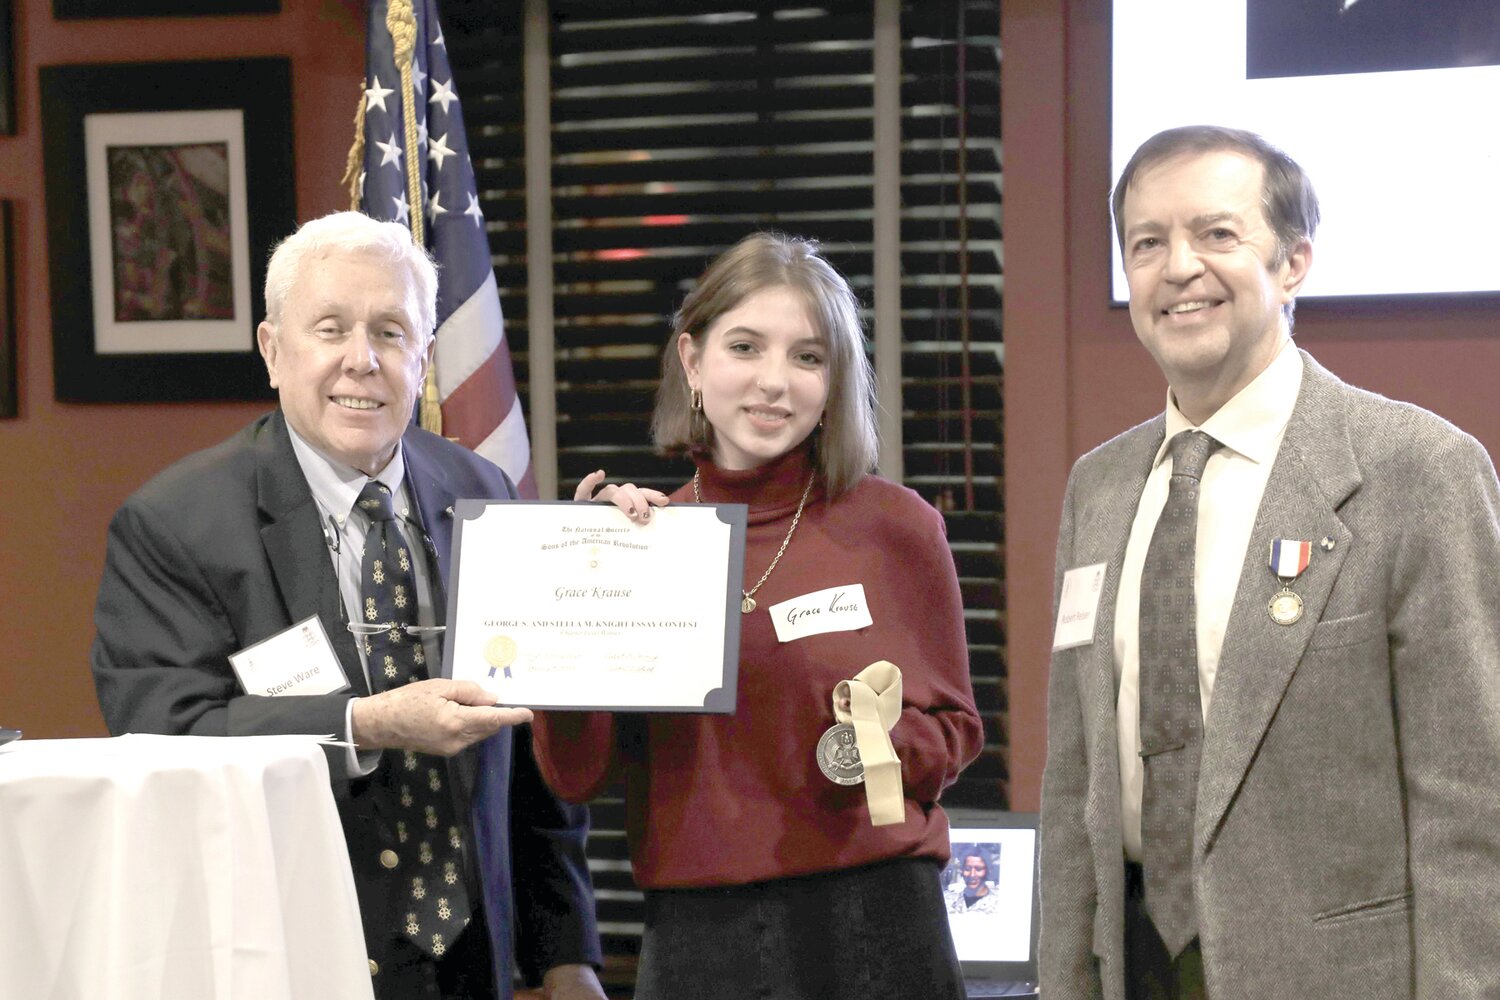 Washington Crossing Chapter Sons of the American Revolution First Vice President Steven Ware, Grace Krause, holding the Knight Essay Medallion and Certificate, and chapter President Robert Reiser.